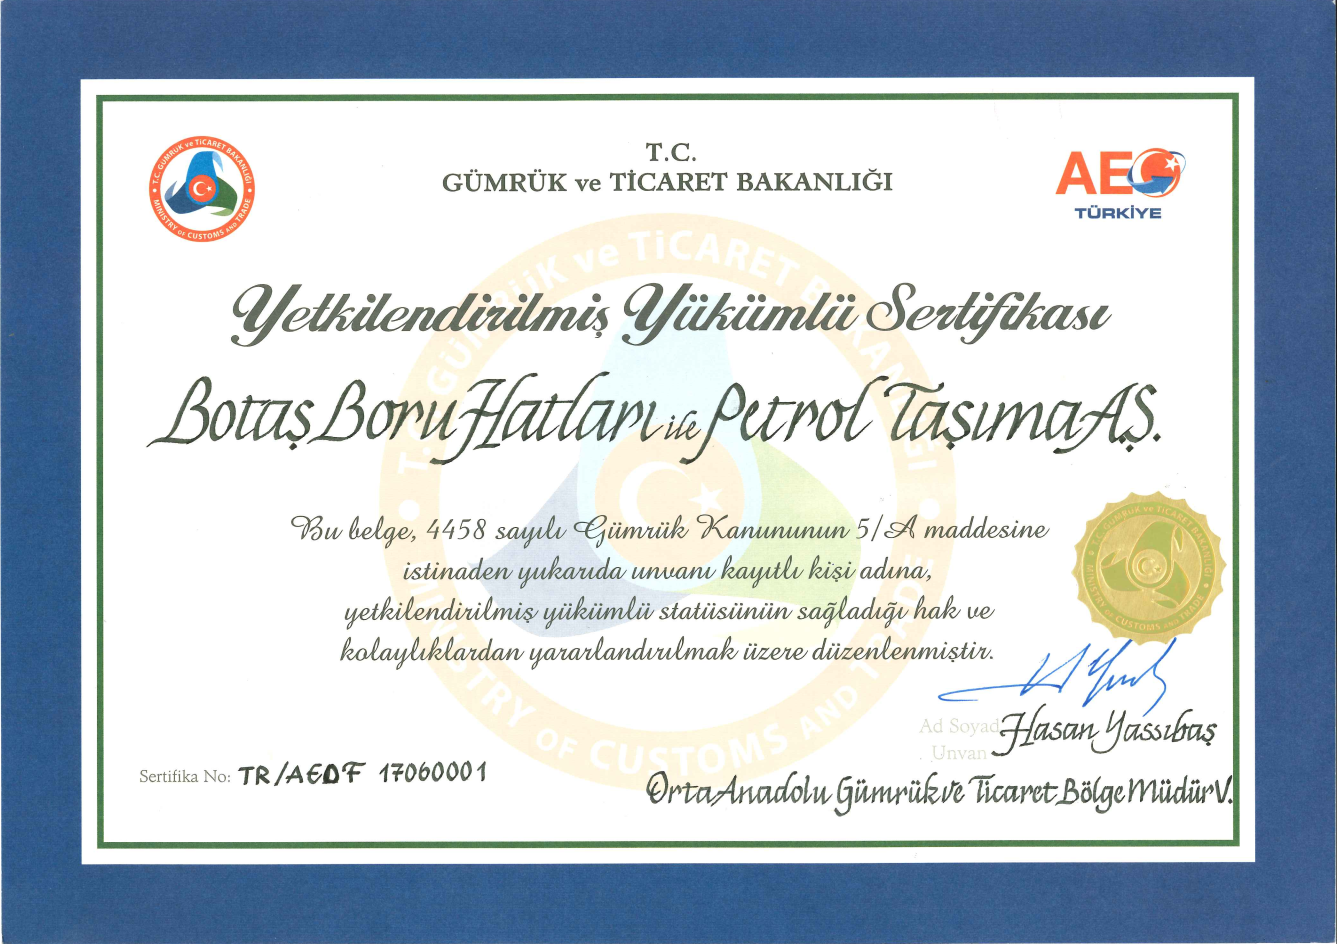 Our Organization Has Been Granted an “Authorized Economic Certificate” by The Ministry of Customs and Trade